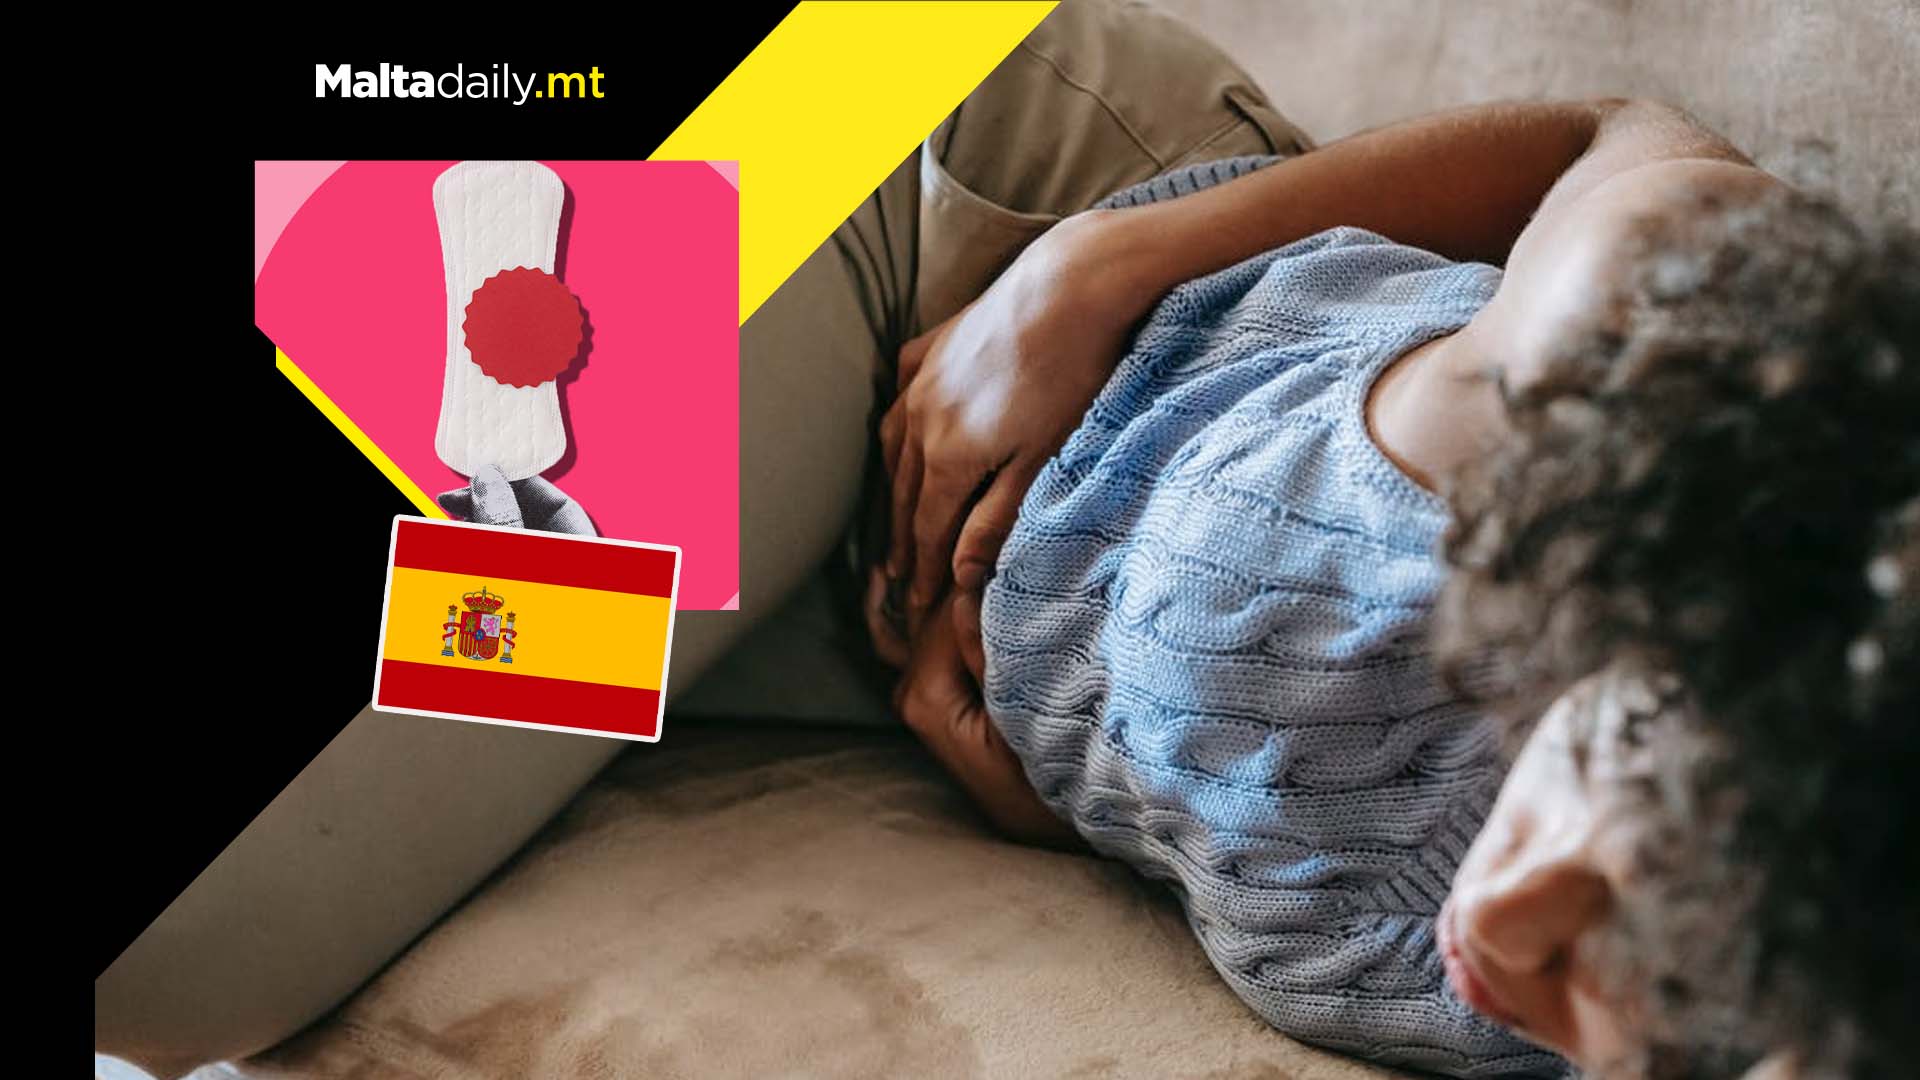 Three day menstrual leave every month for women in Spain